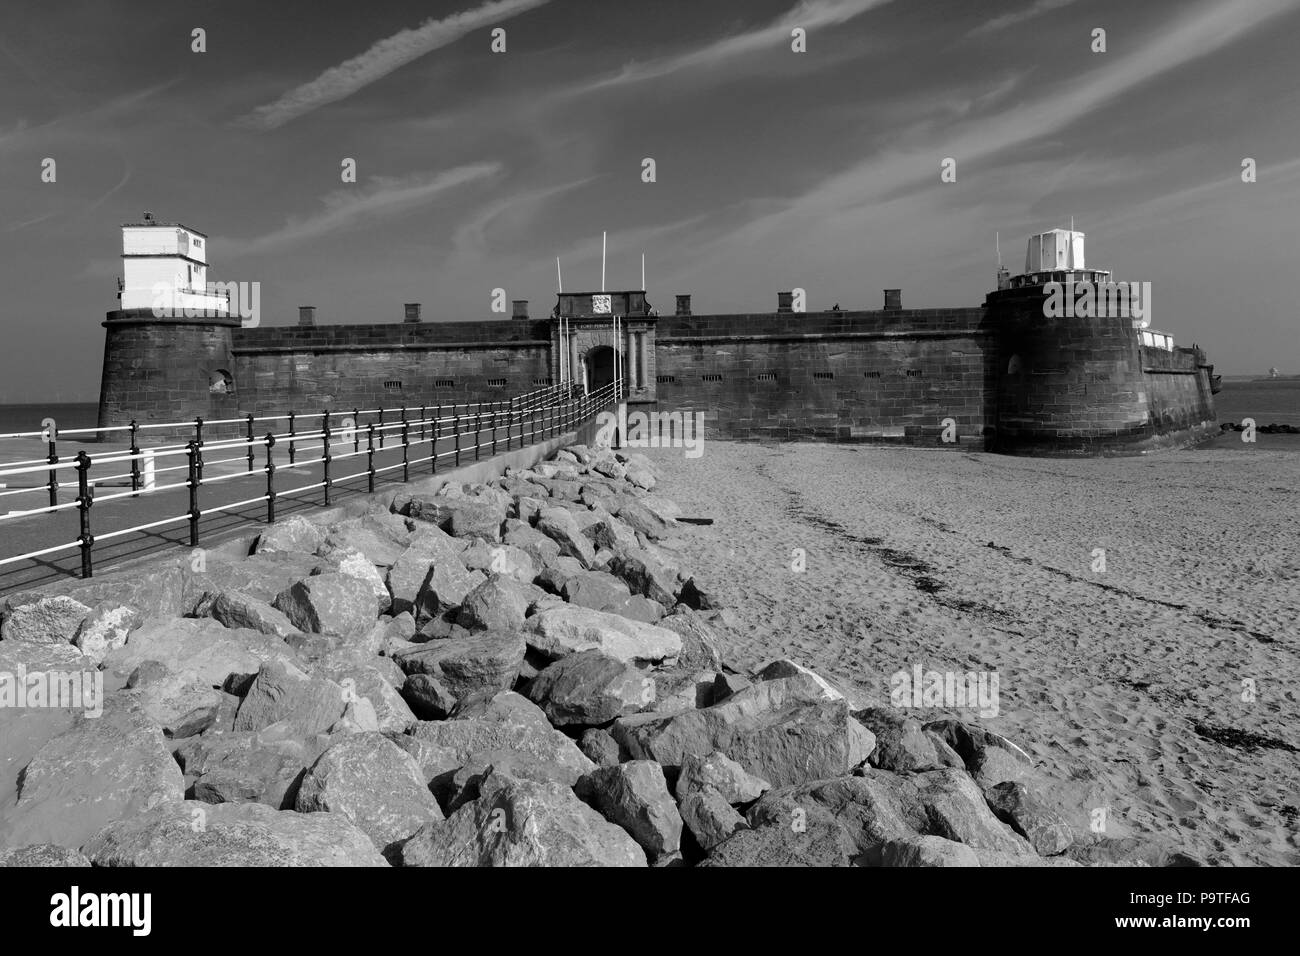 Wallasey Black and White Stock Photos and Images image